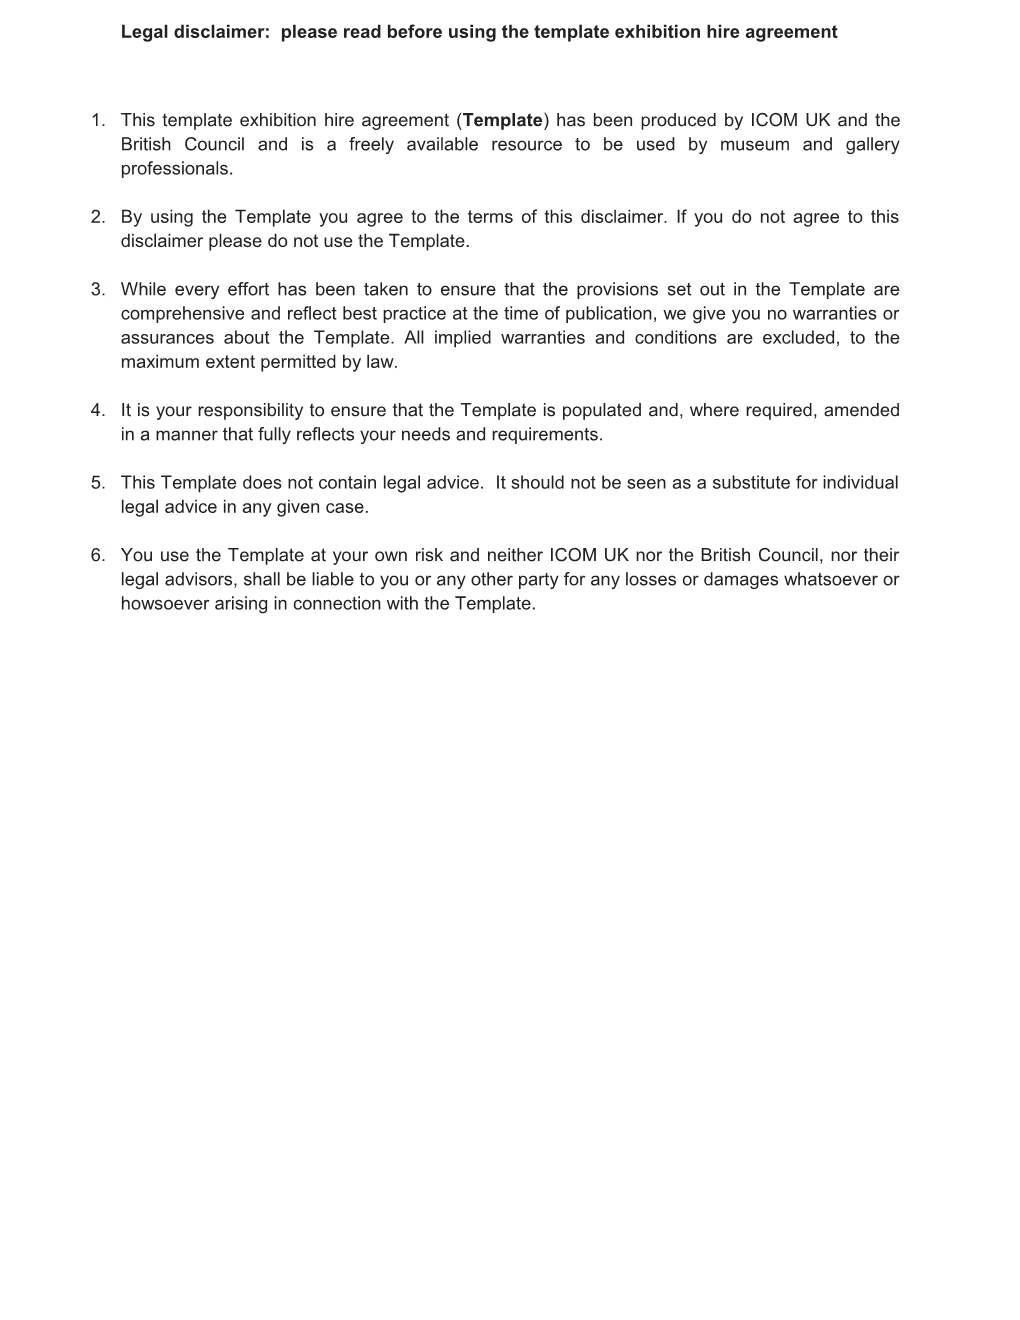 Legal Disclaimer: Please Read Before Using the Template Exhibition Hire Agreement